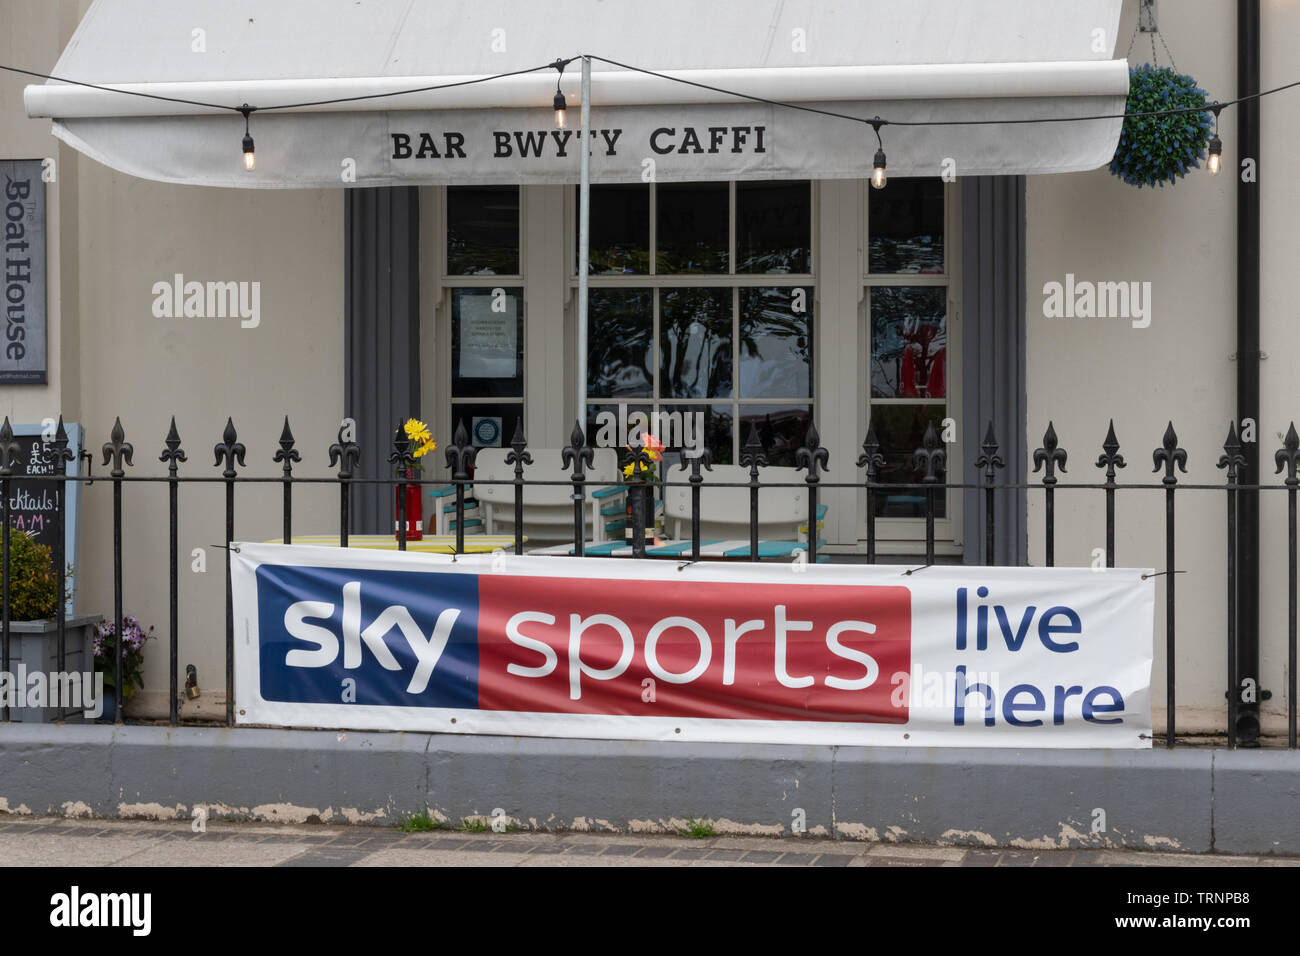 Bar (welsh language bwyty or caffi) with a Sky Sports live here advertising banner outside Stock Photo